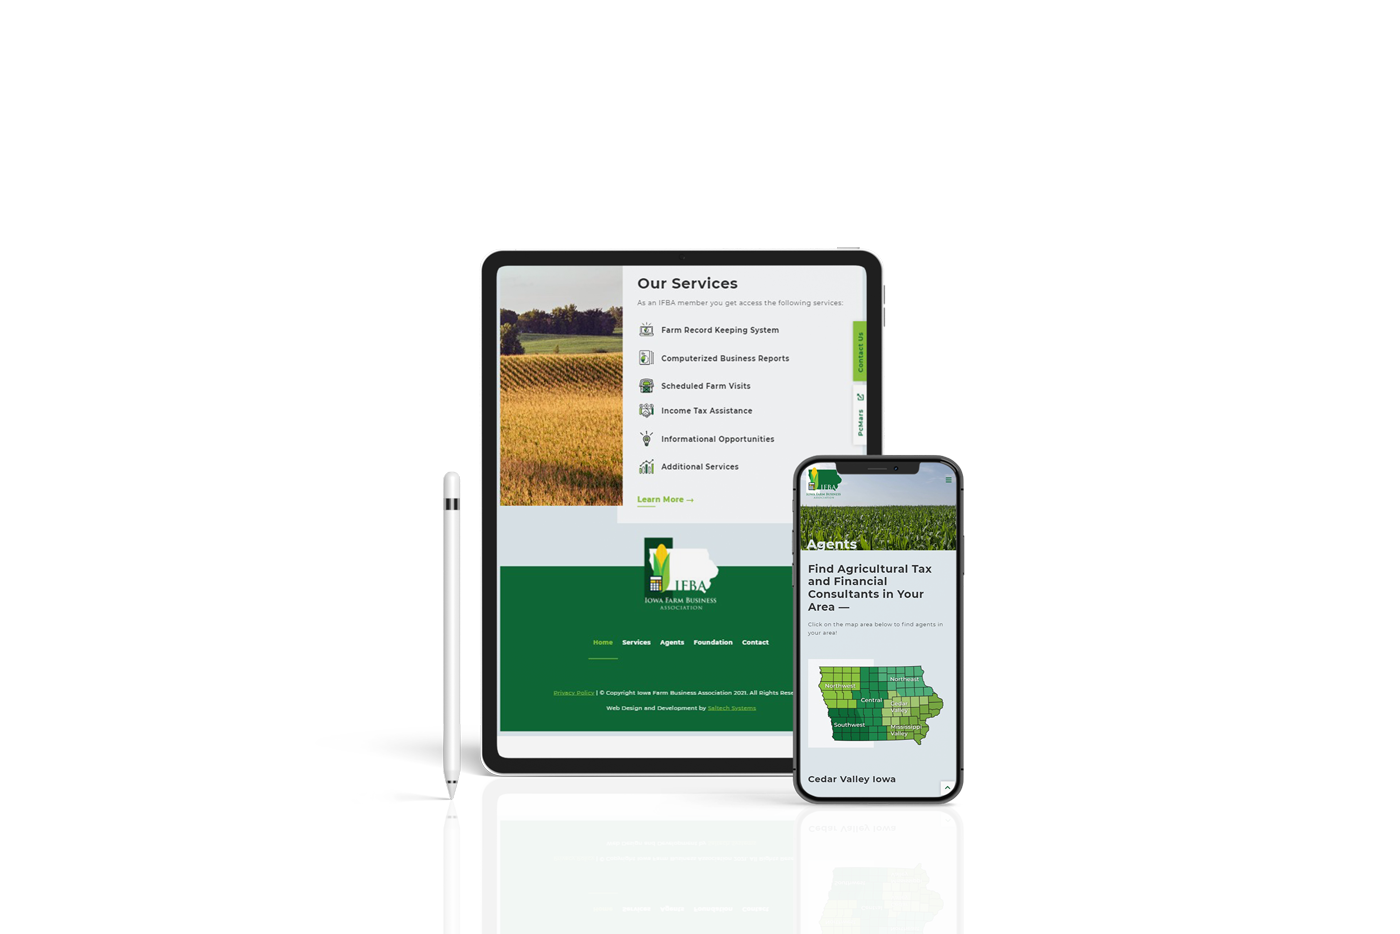 Mockups showing the tablet and mobile views of the Iowa Farm Business Association website